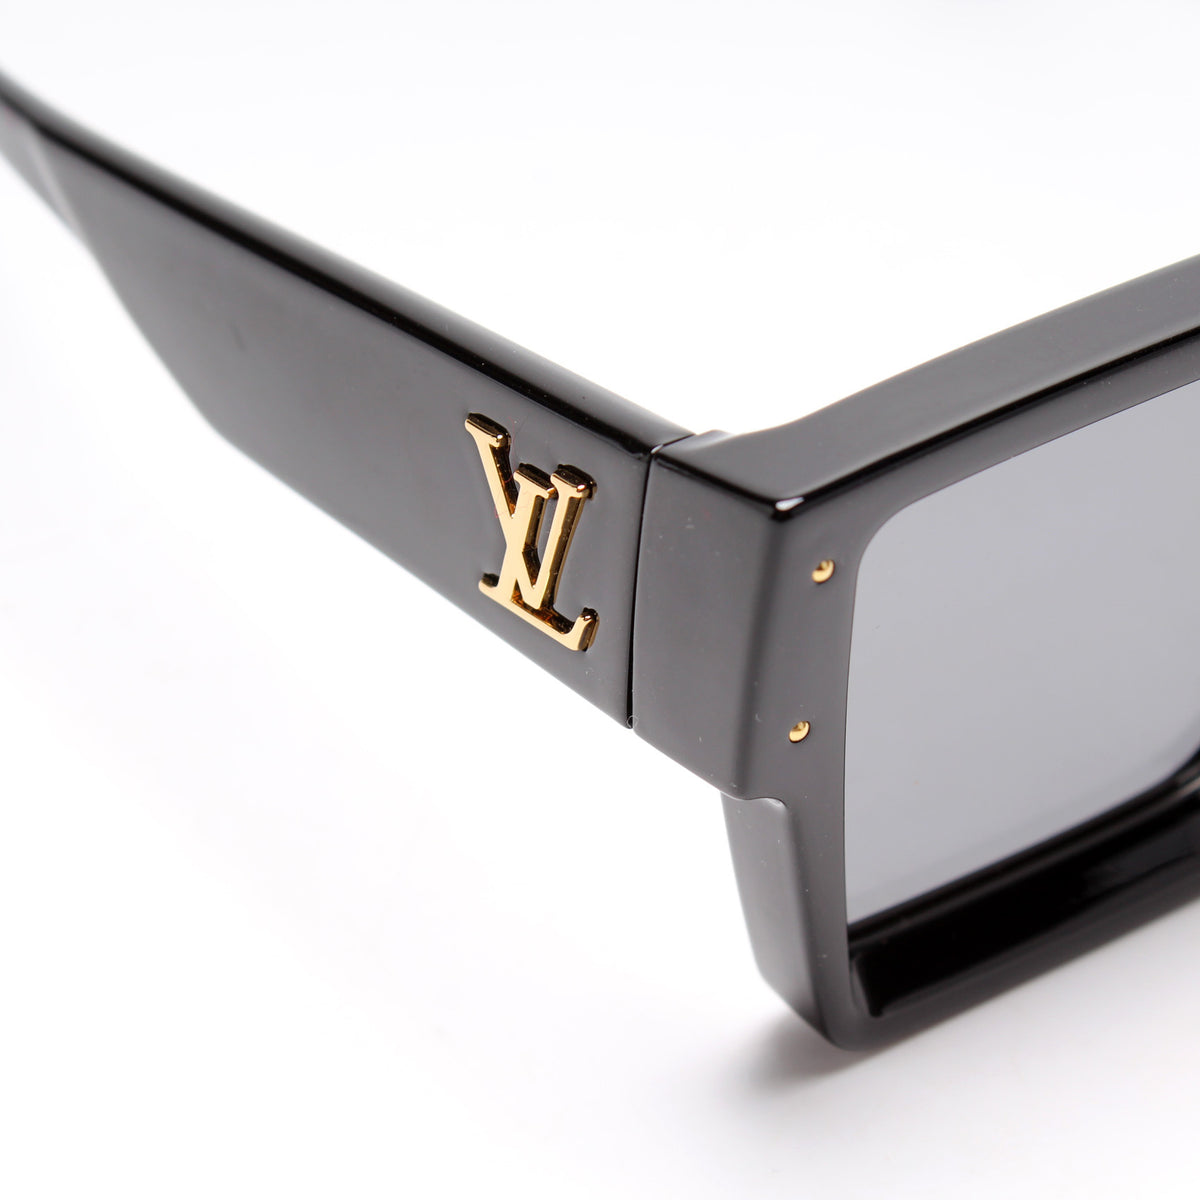 LOUIS VUITTON CYCLONE SUNGLASSES BLACK GOLD CRYSTAL Z1578W Used 2 Times  $99.00 - PicClick